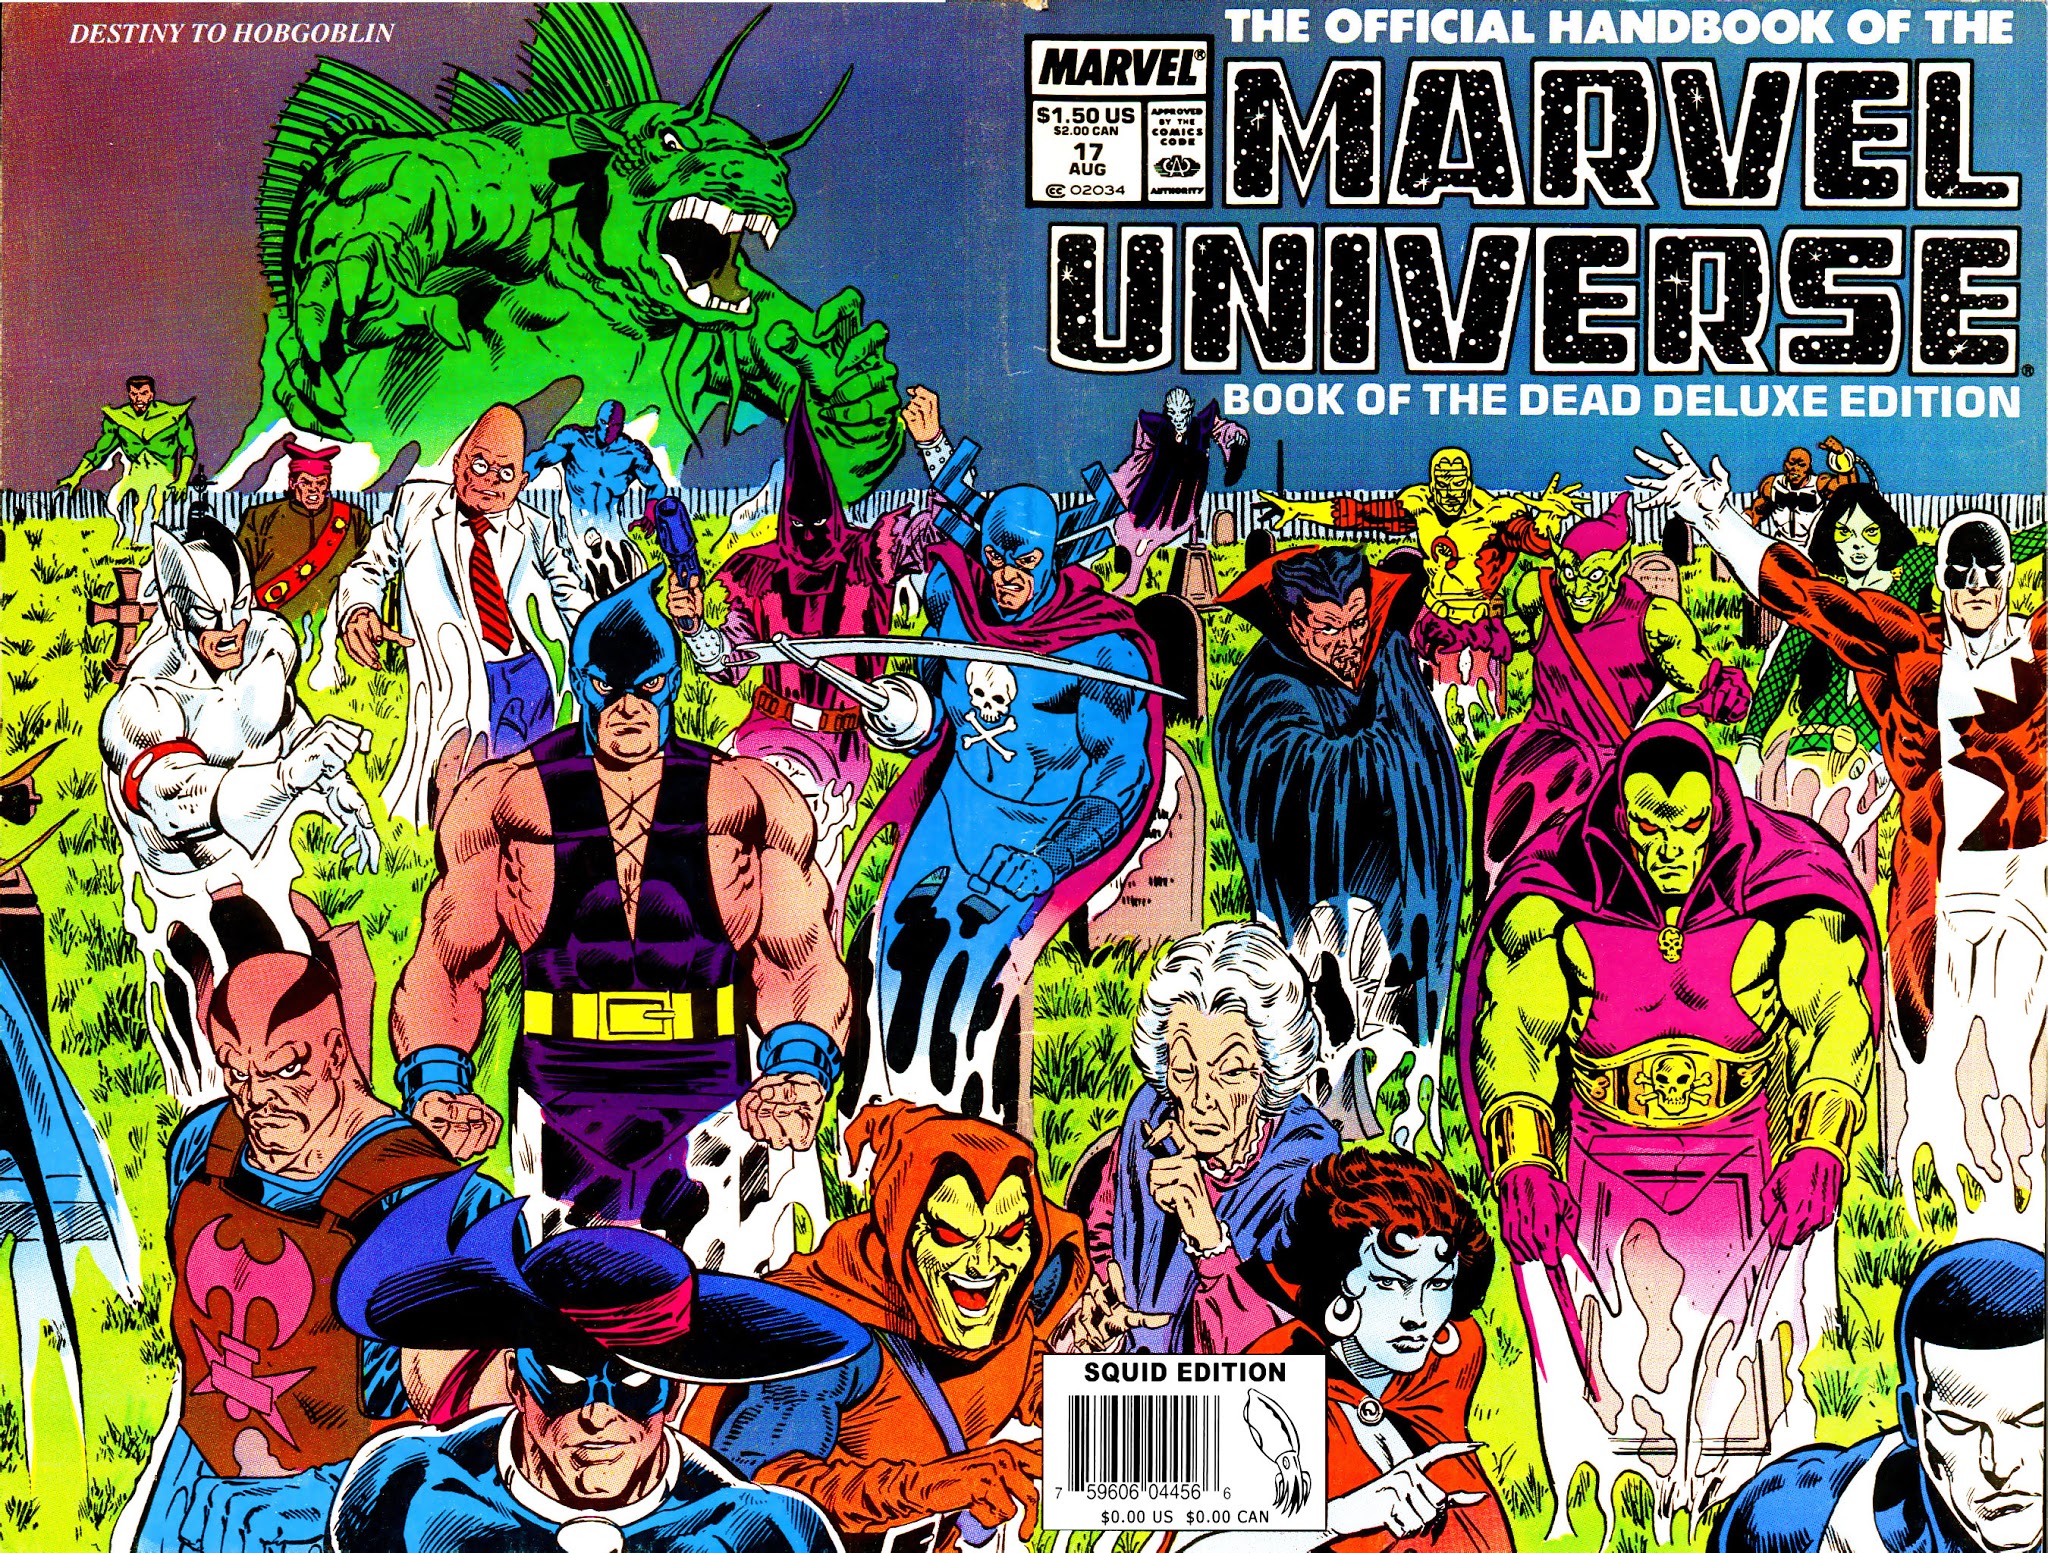 Read online The Official Handbook of the Marvel Universe Deluxe Edition comic -  Issue #17 - 1